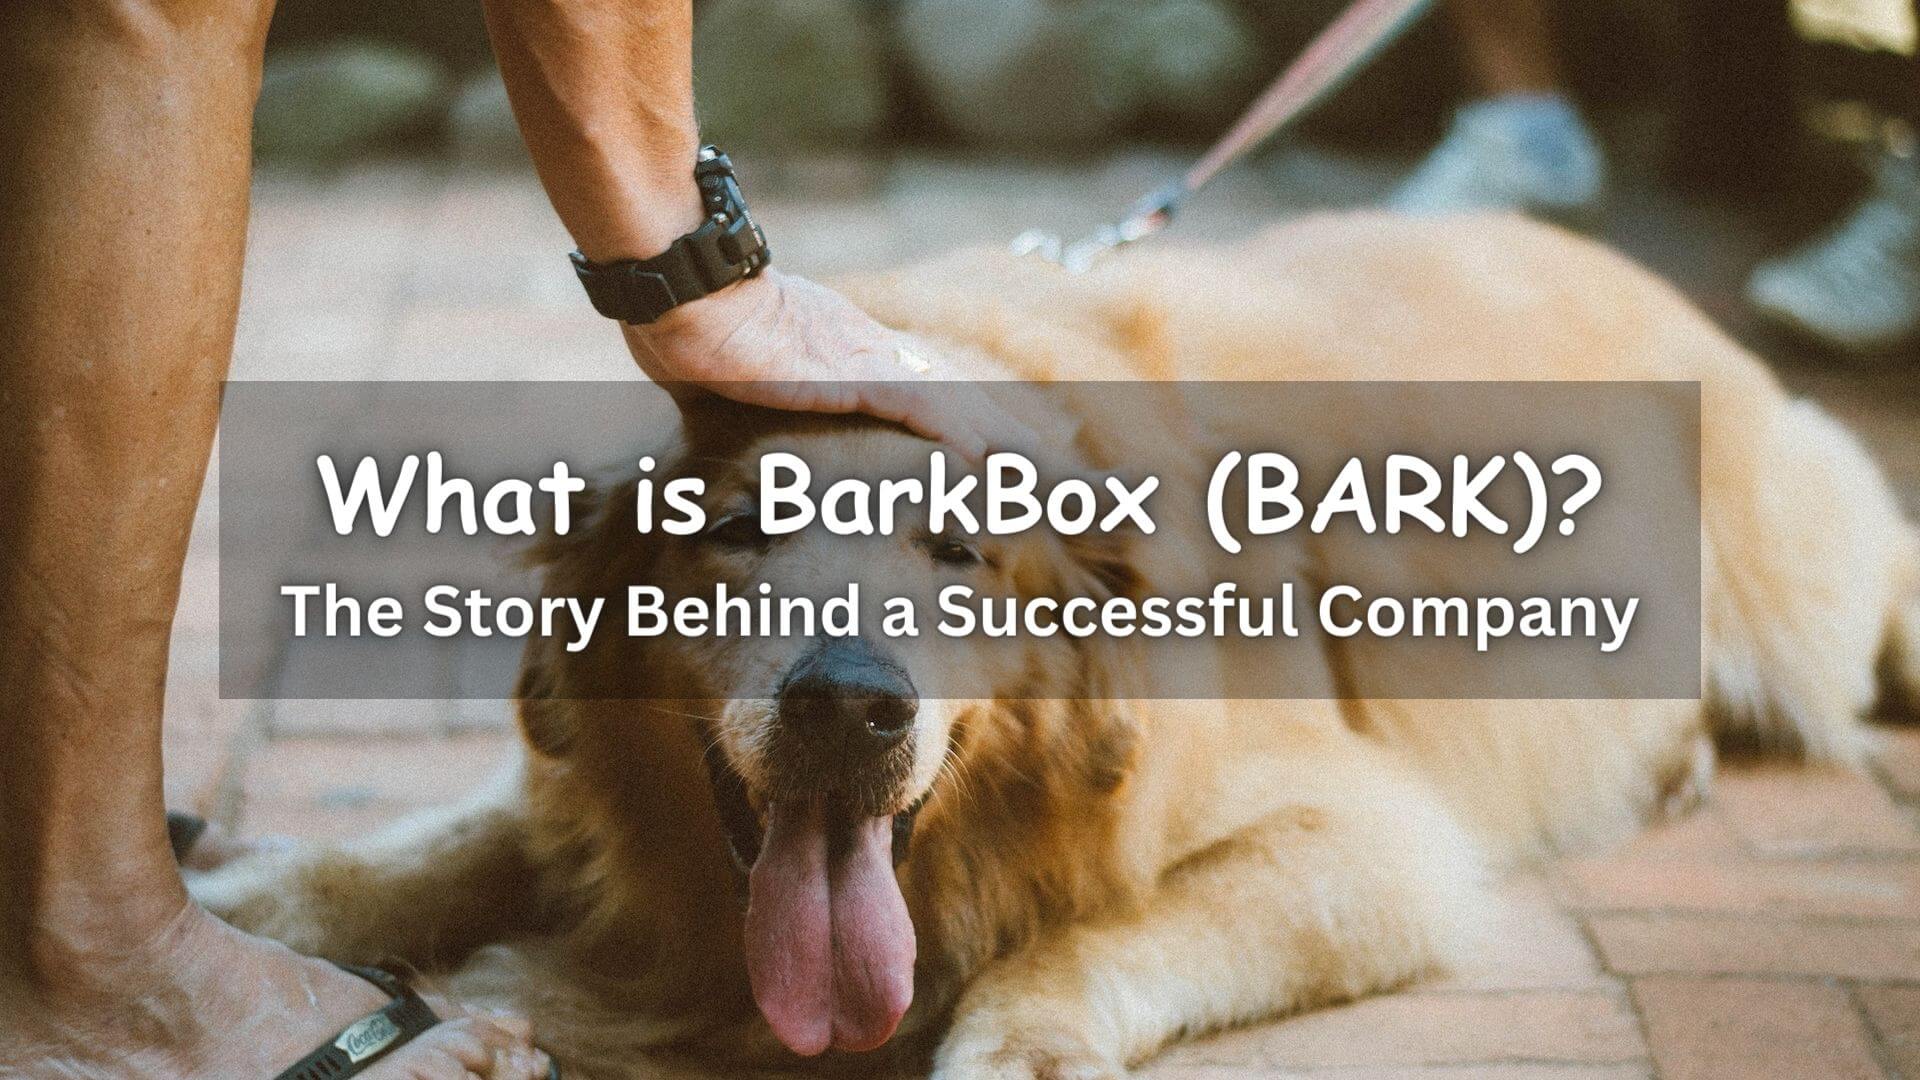 BARK, formerly known as BarkBox, is a dog-centric company with a single-minded devotion to making dogs and their people happy. Learn more!